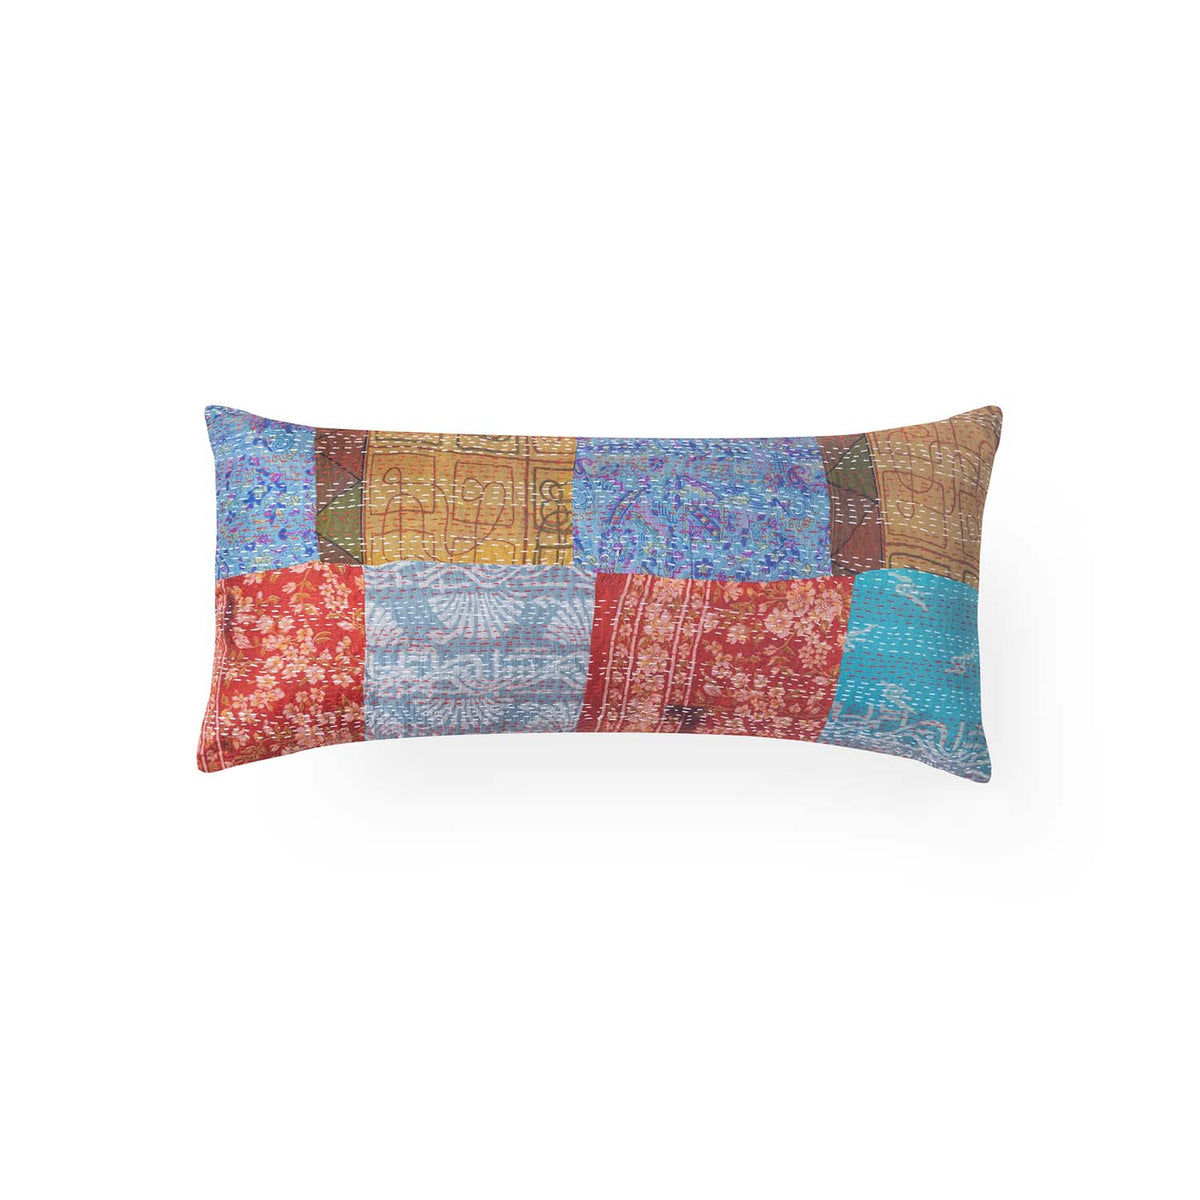 PatchWork Kantha Cushion Cover - 11X22